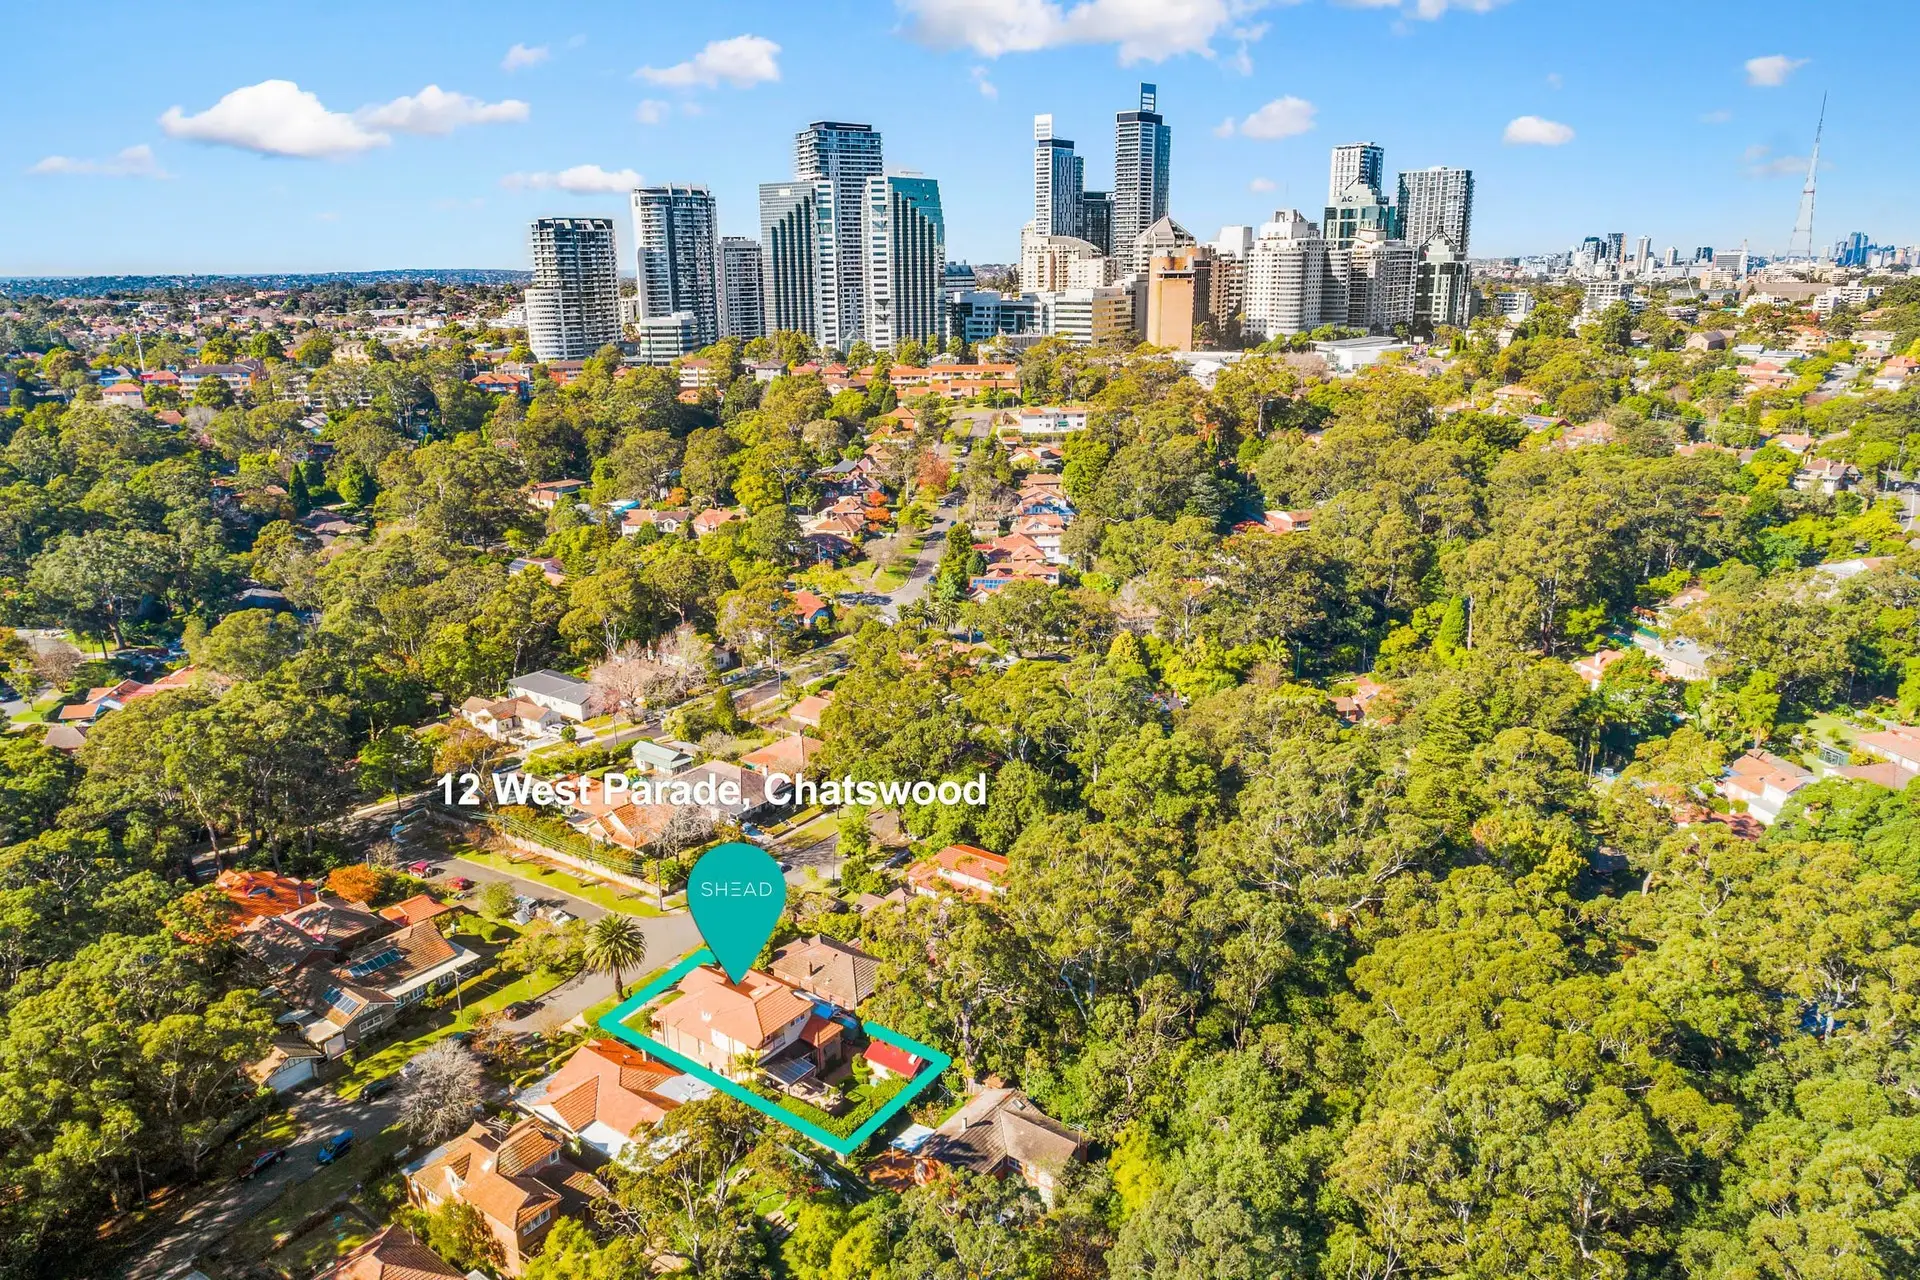 12 West Parade, Chatswood Sold by Shead Property - image 1